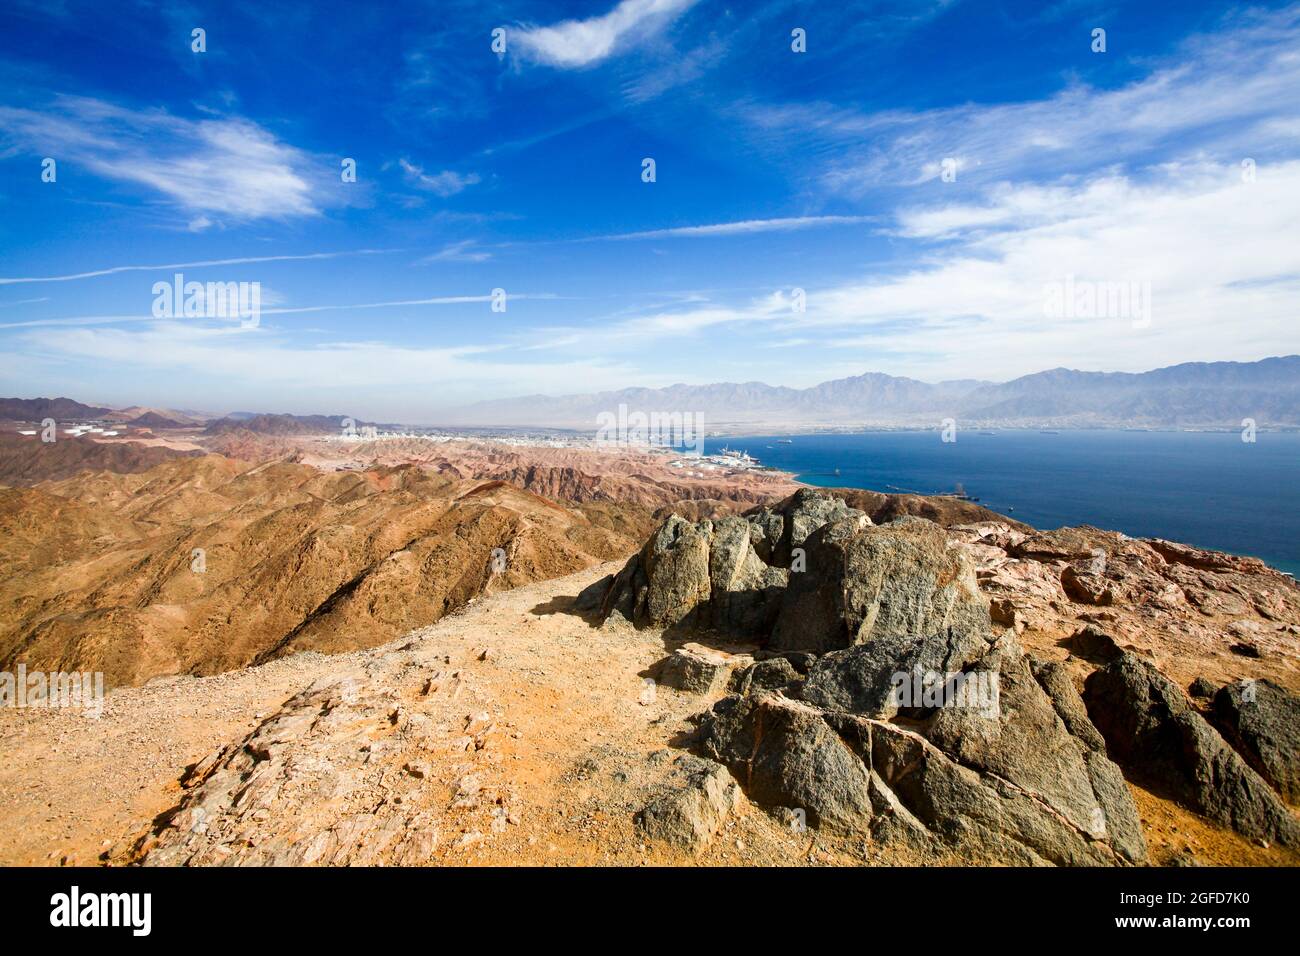 The colourful Eilat mountain range The gulf of Aqaba in the background Stock Photo